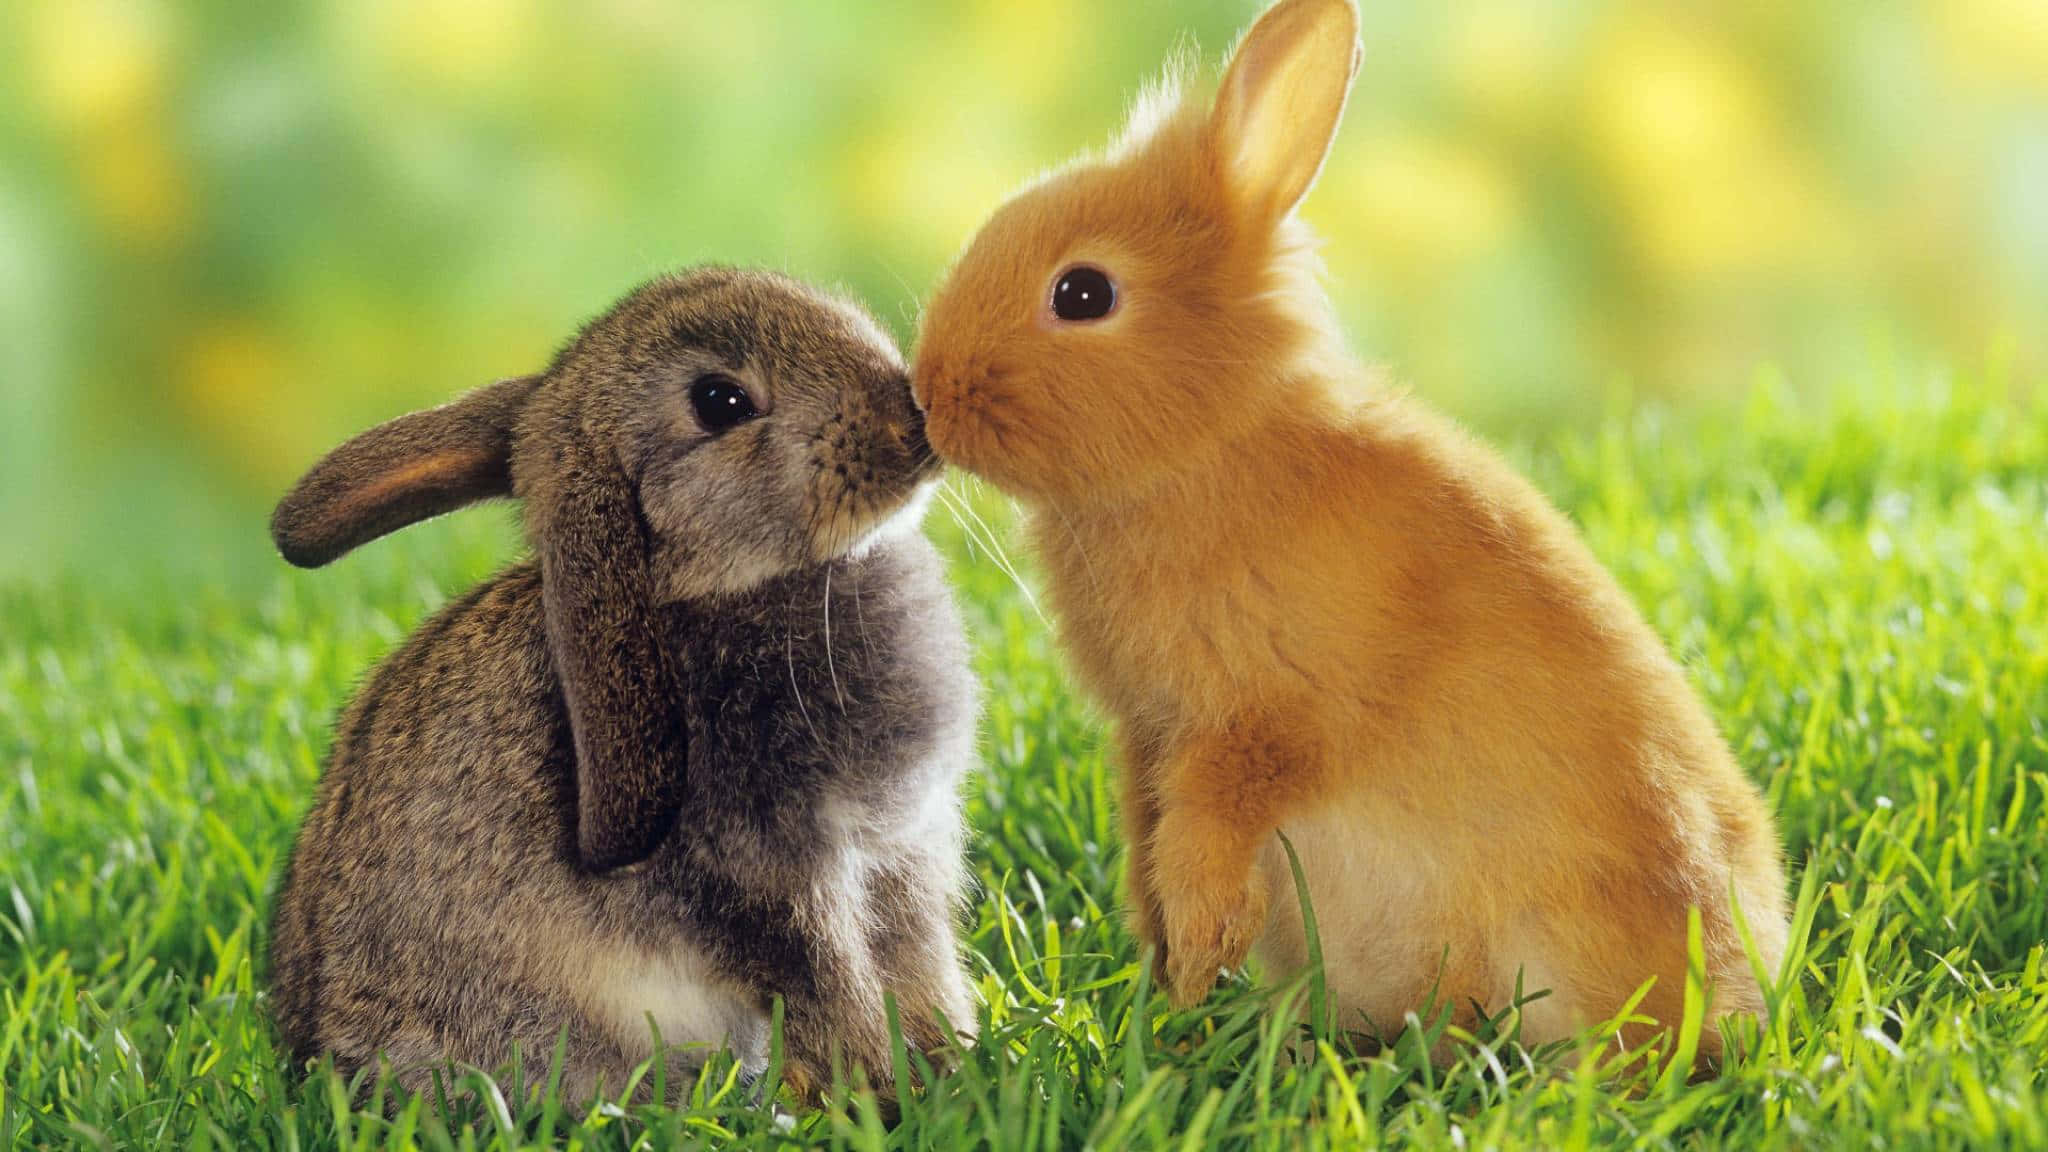 A cute brown and white bunny embracing a carrot.